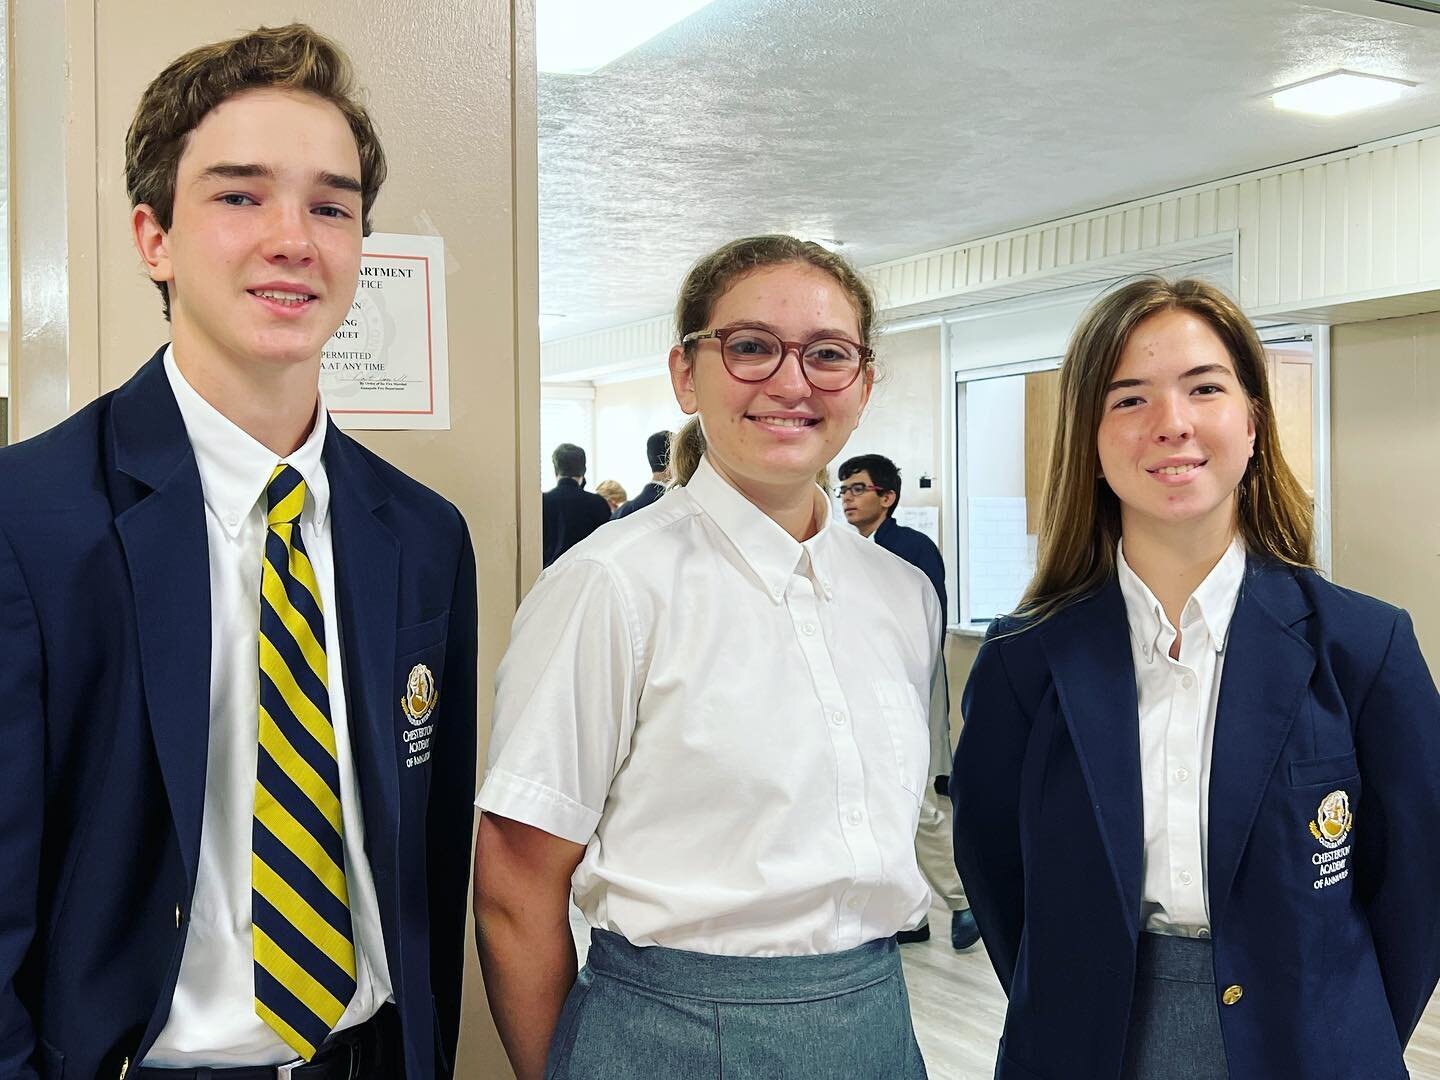 It was such a joy to welcome all of our students today for orientation!!

#ChestertonAcademyofAnnapolis #CAA #ChestertonSchoolsNetwork #Annapolis #Catholic #HighSchool